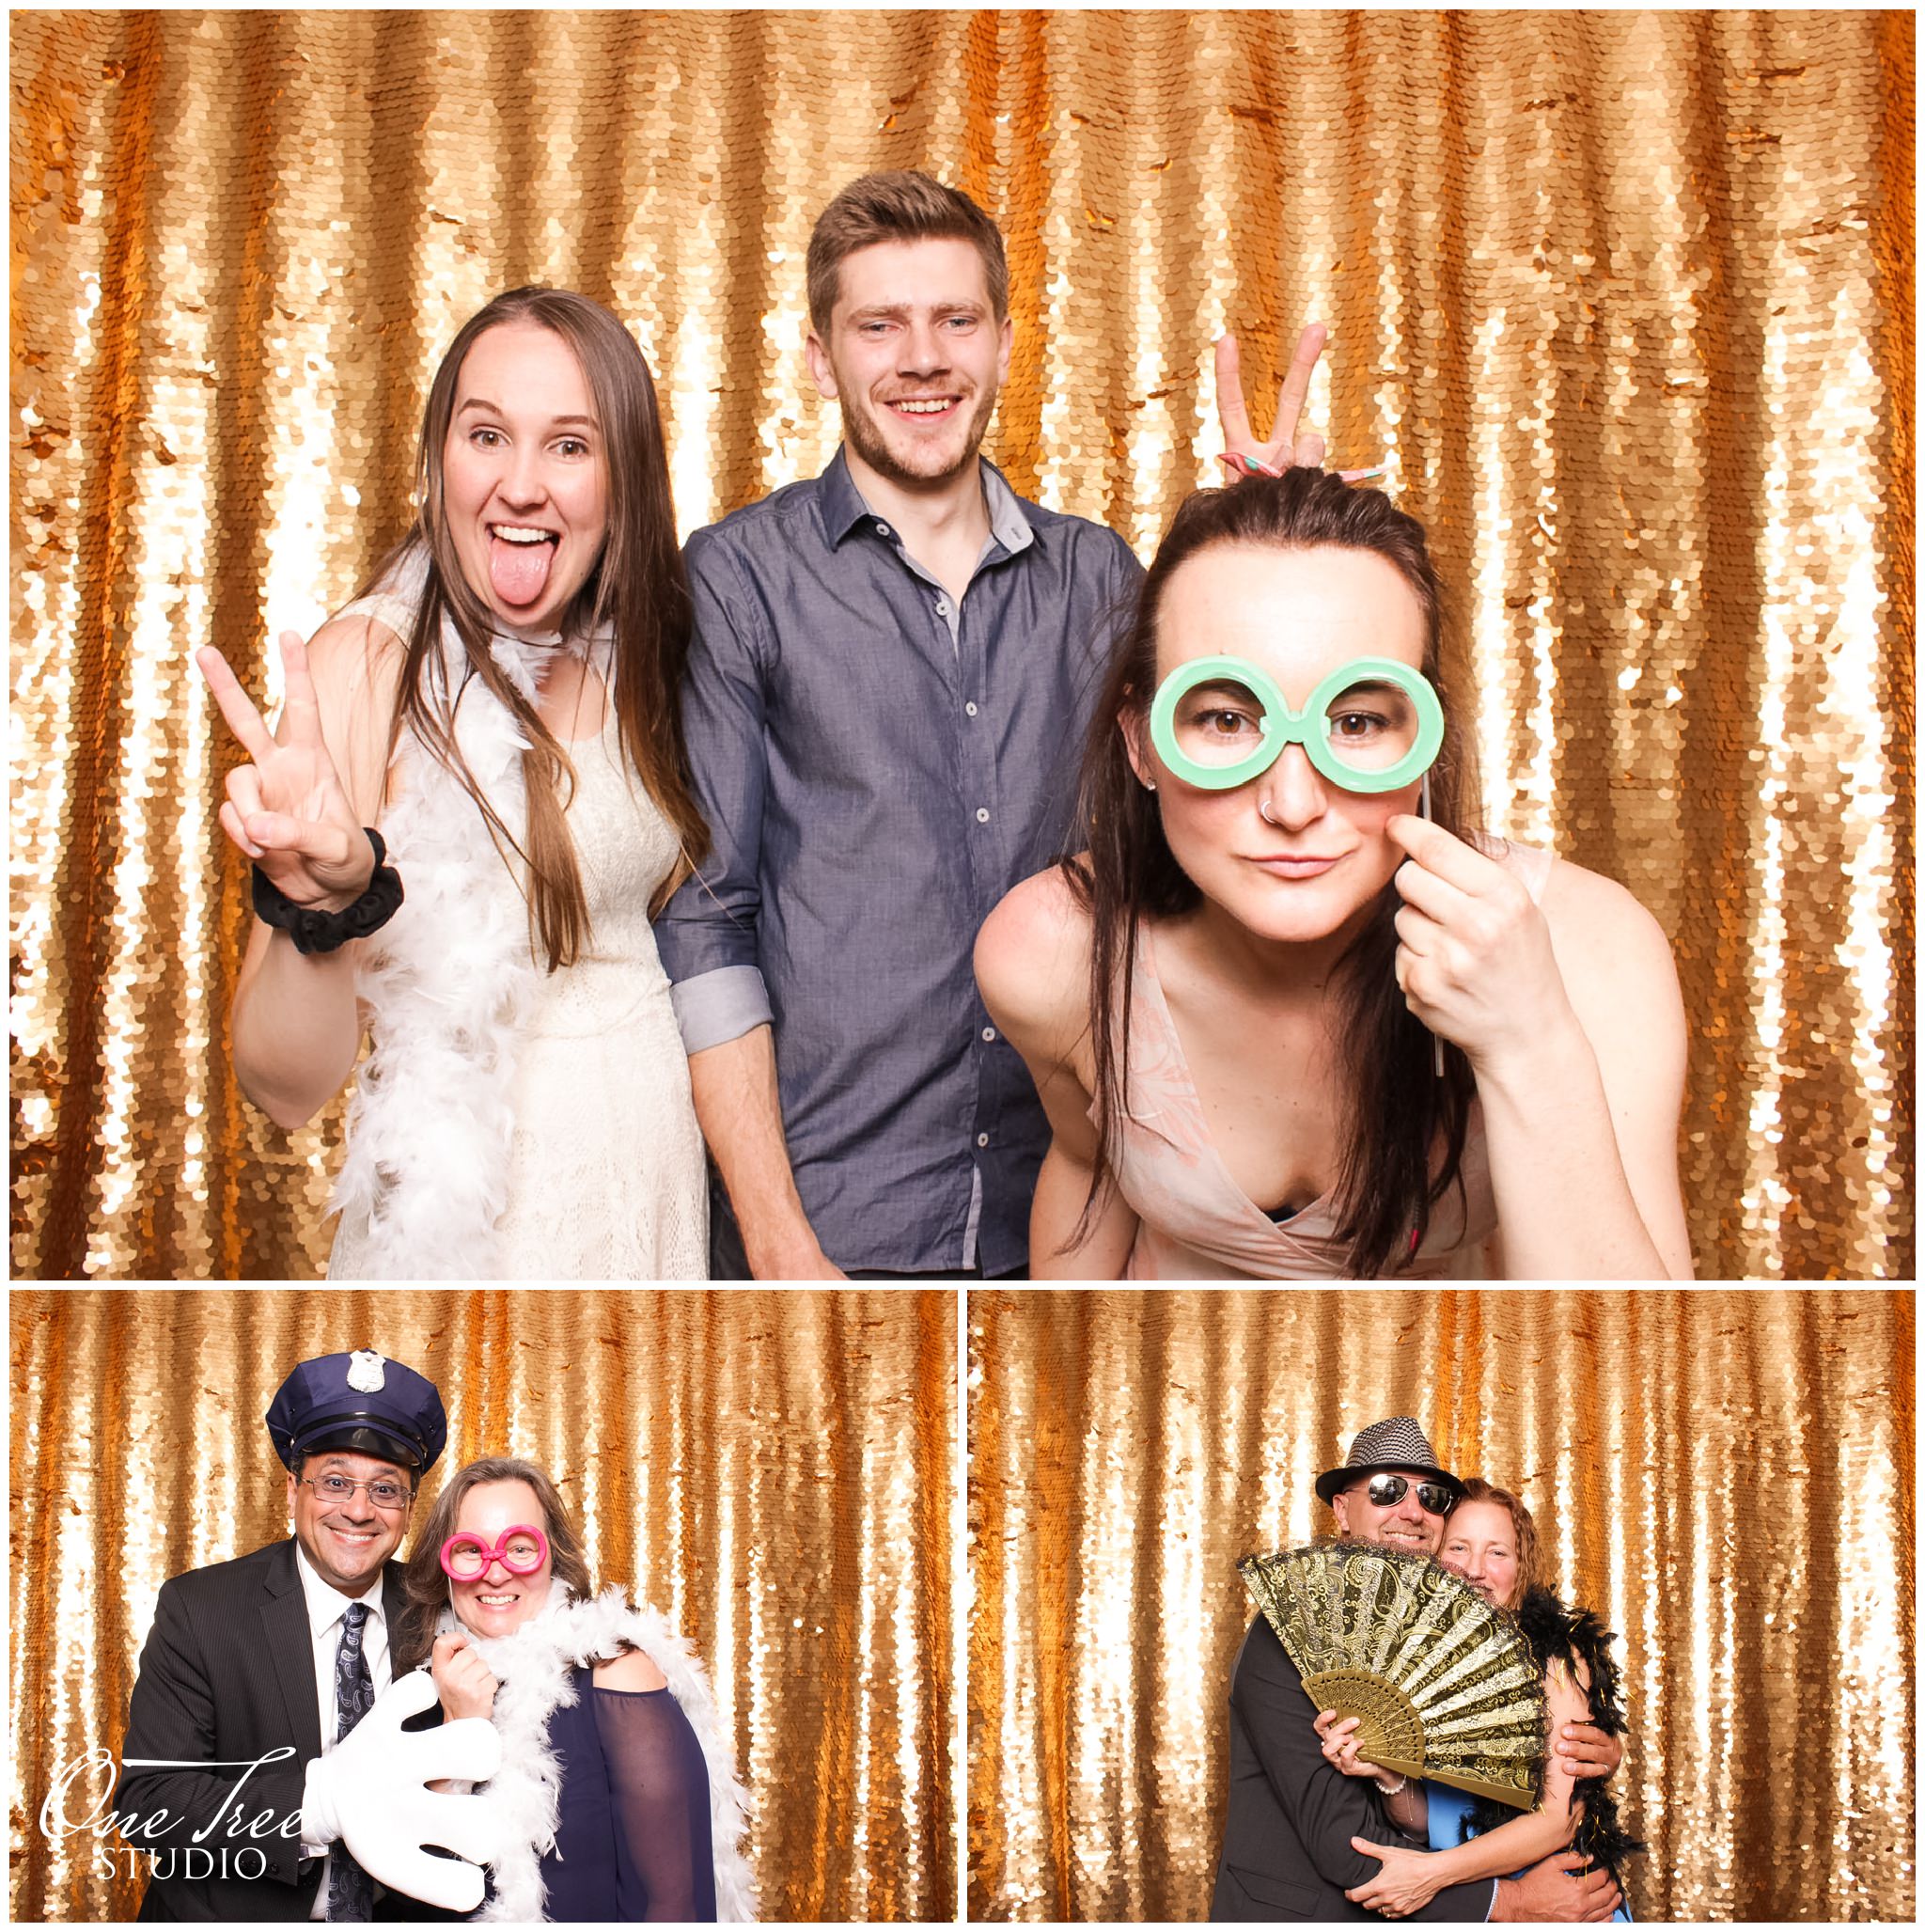 Wedding Photo Booth at The Manor | One Tree Studio Booth